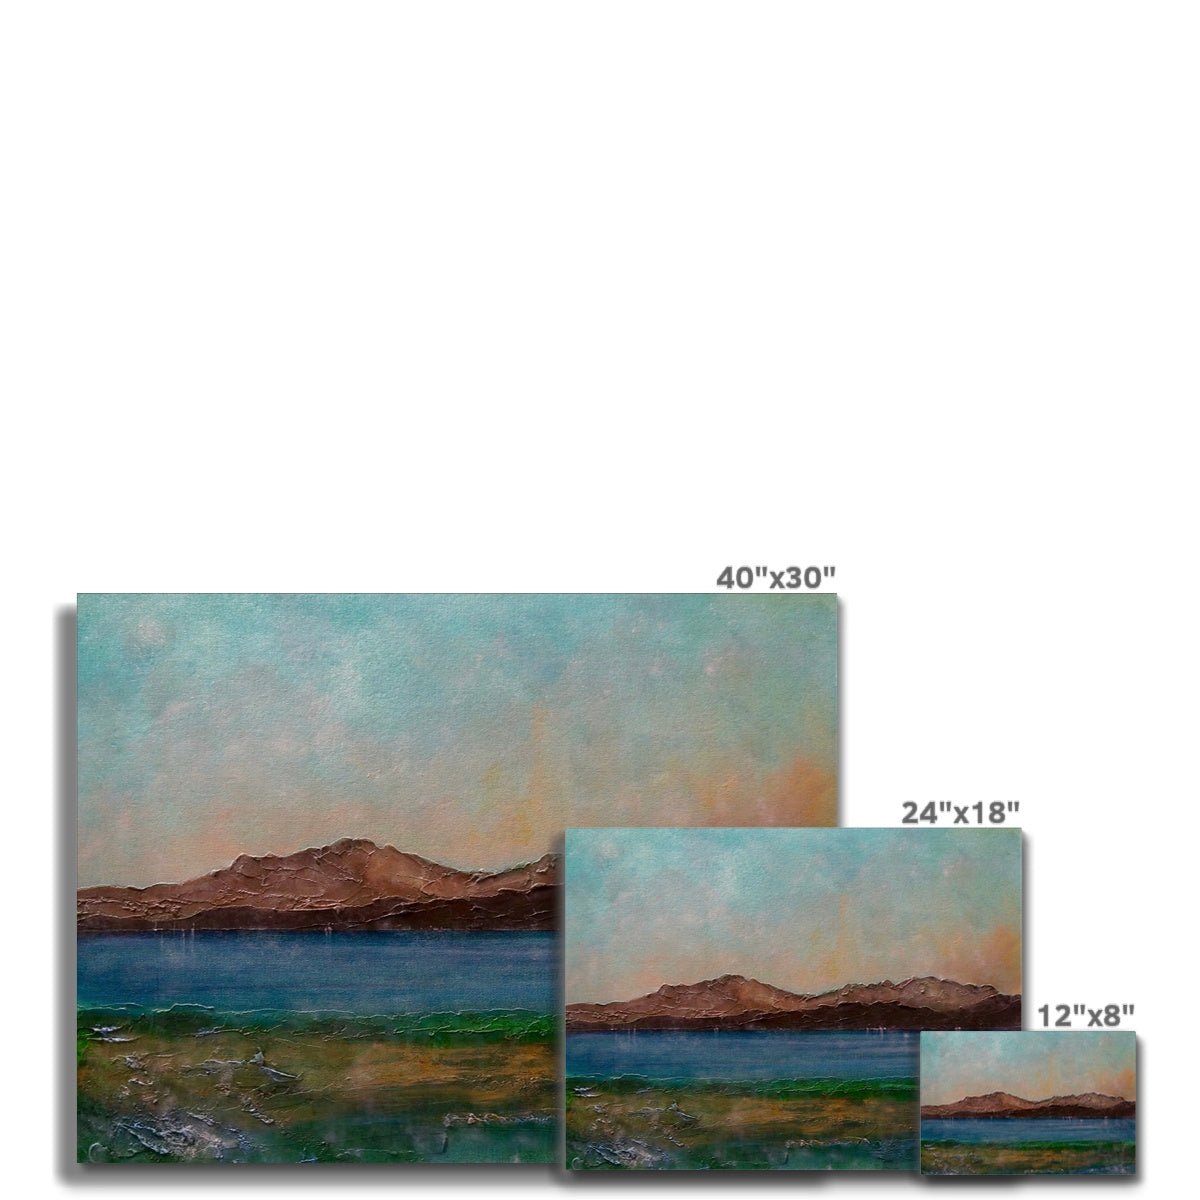 Arran From Scalpsie Bay Painting | Canvas From Scotland-Contemporary Stretched Canvas Prints-Arran Art Gallery-Paintings, Prints, Homeware, Art Gifts From Scotland By Scottish Artist Kevin Hunter